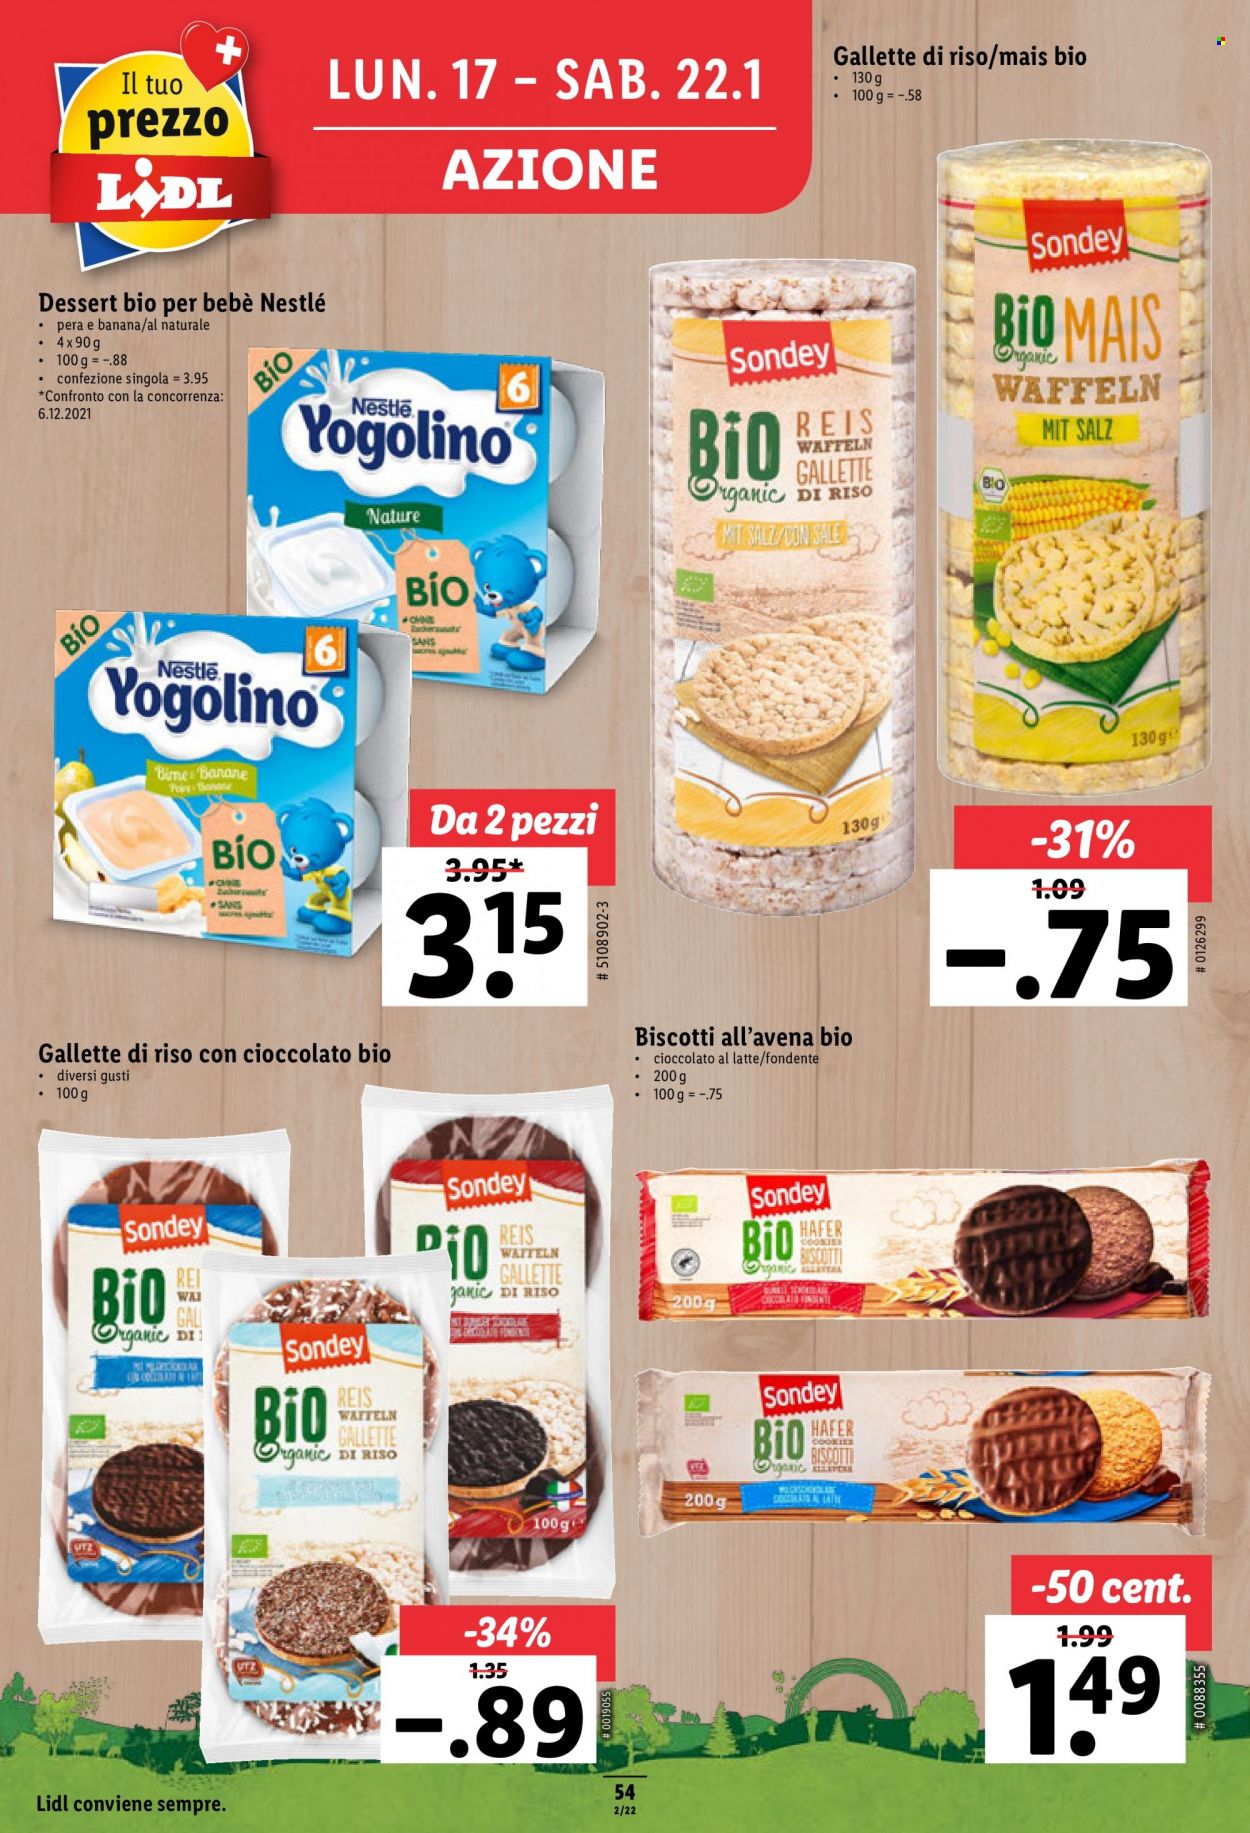 Catalogue Lidl - 13.1.2022 - 19.1.2022. Page 54.